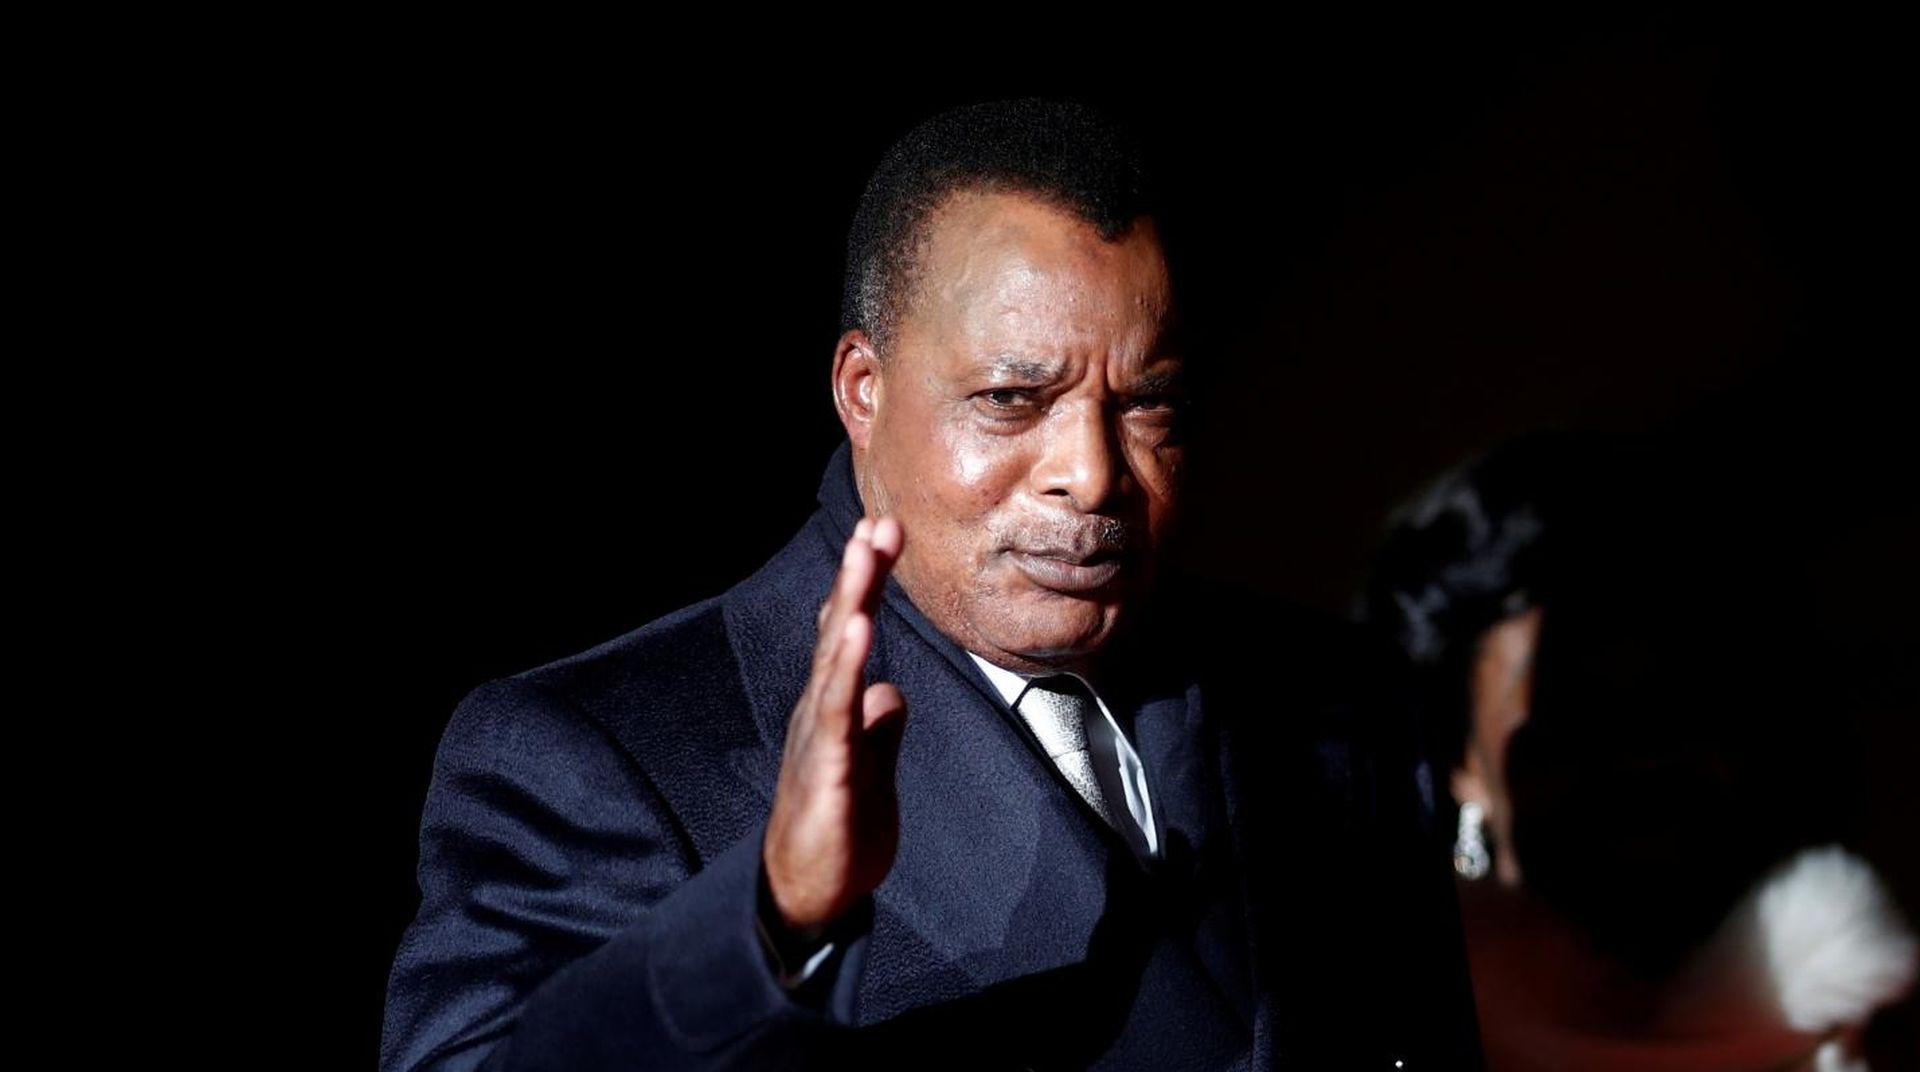 FILE PHOTO: Republic of the Congo's President Denis Sassou Nguesso and his wife Antoinette arrive to attend a visit and a dinner at the Orsay Museum in Paris FILE PHOTO: Republic of the Congo's President Denis Sassou Nguesso and his wife Antoinette arrive to attend a visit and a dinner at the Orsay Museum on the eve of the commemoration ceremony for Armistice Day, 100 years after the end of the First World War, in Paris, France, November 10, 2018.  REUTERS/Benoit Tessier/File Photo Benoit Tessier